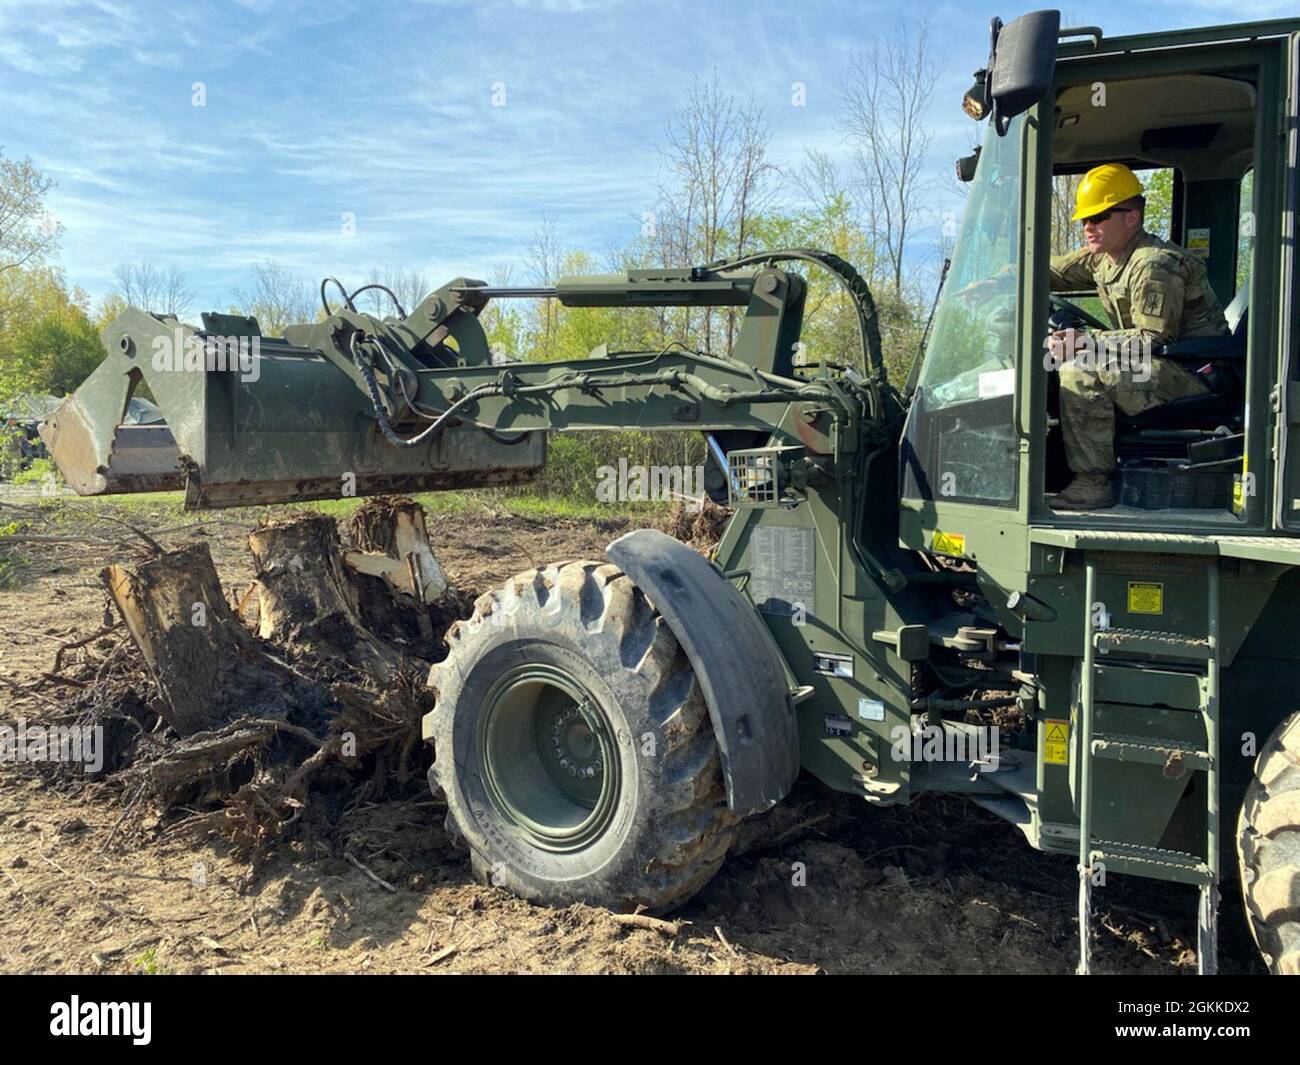 A New York Army National Guard Soldier assigned to the 152nd Engineer Company uses a dozer to clear tree trunks and debris during construction operations at the National Guard Youngstown Local Training Area in Youngstown, N.Y., May 15, 2021 during unit annual training. The company returned to the field for collective training for engineer tasks after a year of virtual training, constructing an Army Combat Fitness Course, a Situational Training Exercise lanes course and a land navigation course. Stock Photo